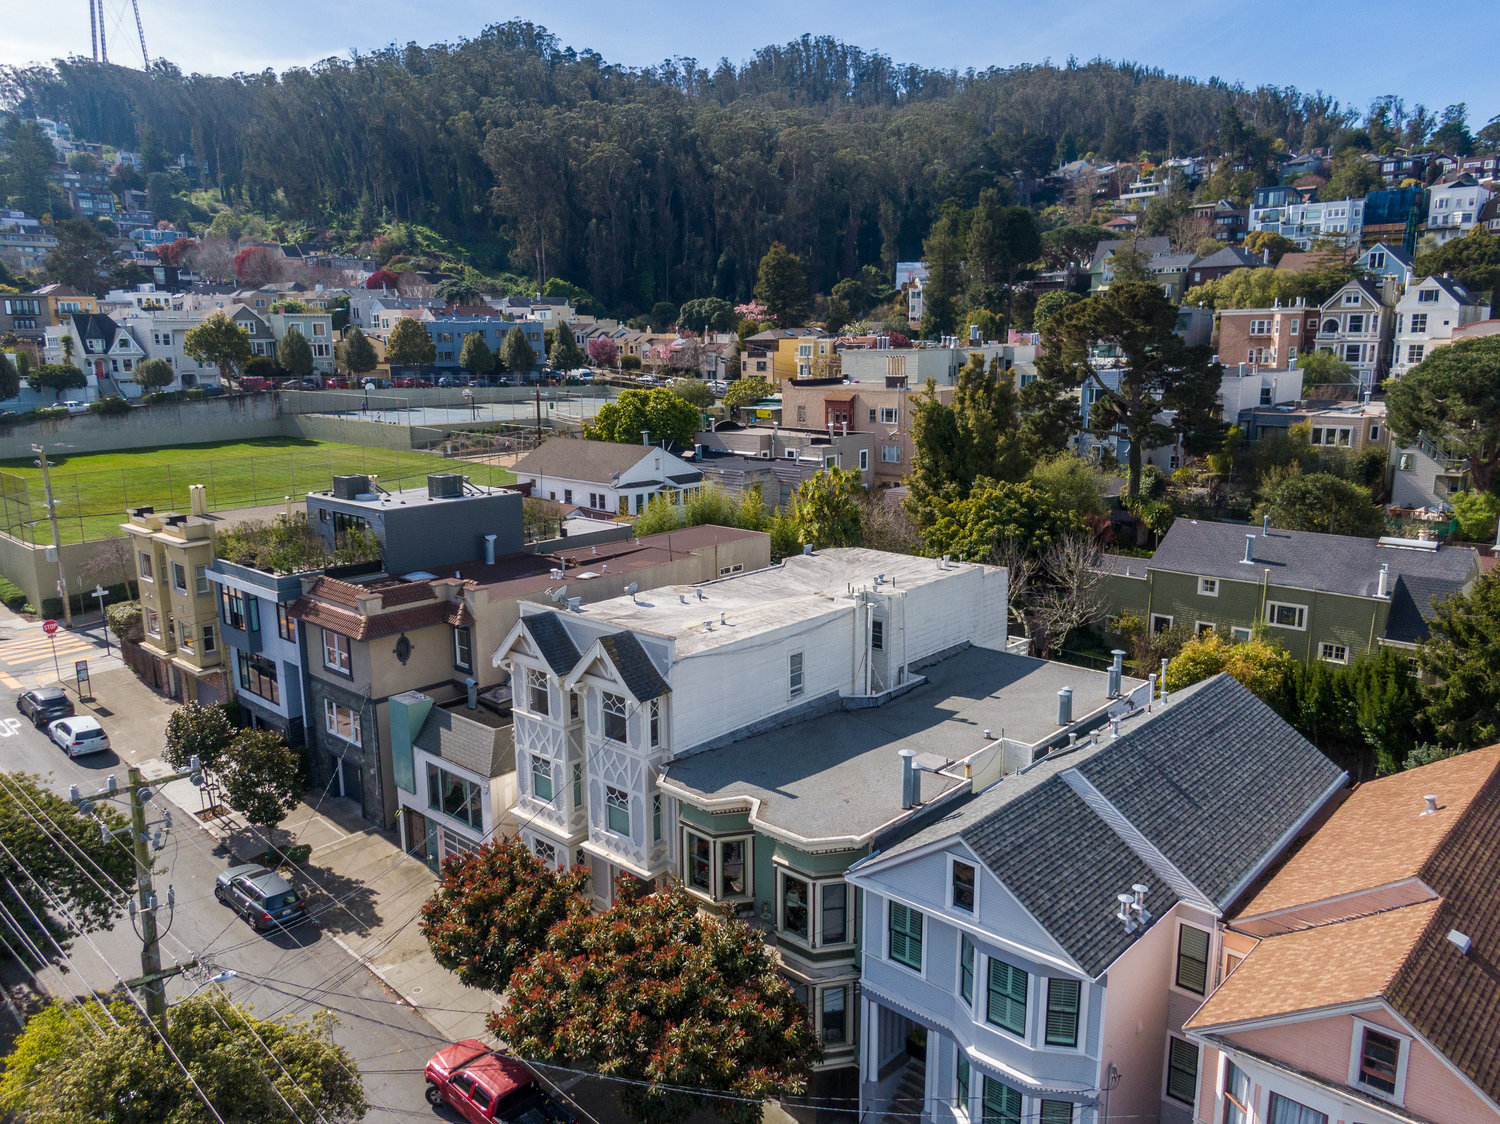 Property Photo: View of 1223 Shrader Street, showing a nearby park and Sutro Forrest